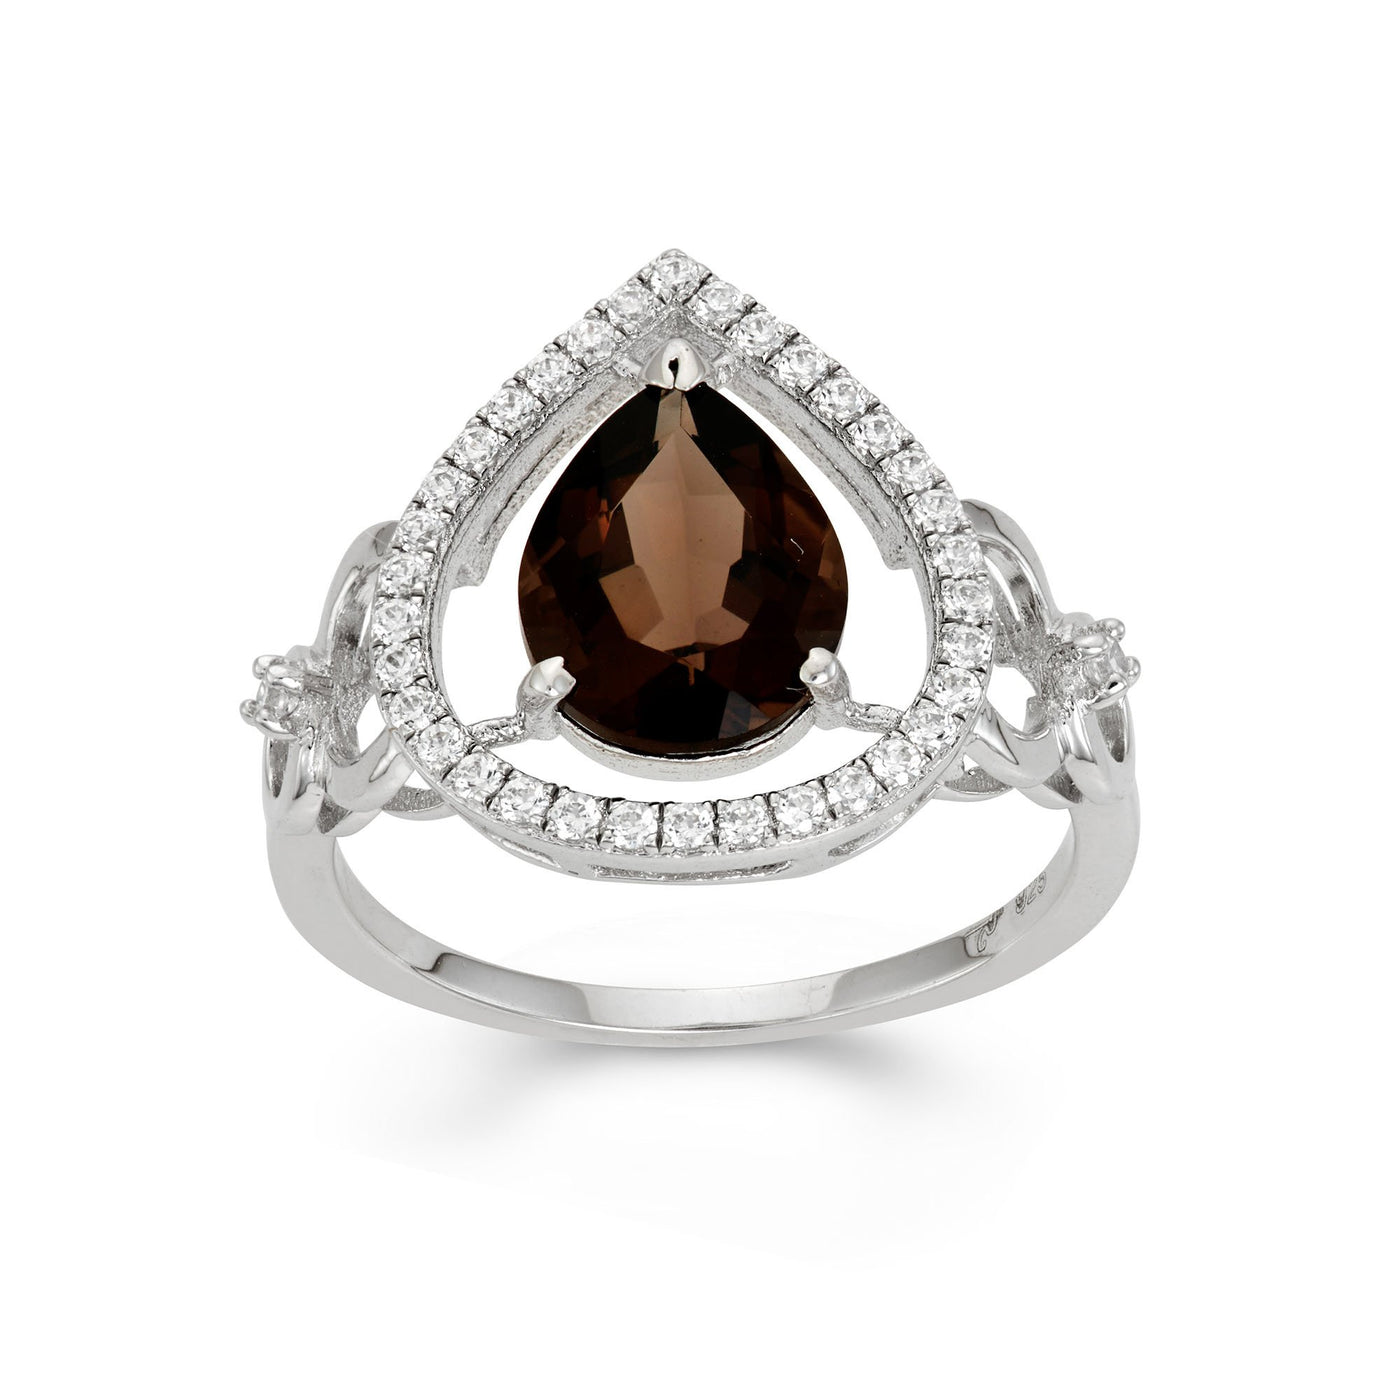 Platinum Plated Sterling Silver Open Teardrop Ring With 10 X 8 mm Faceted Smokey Topaz and Gallery Of Dalloz CZ